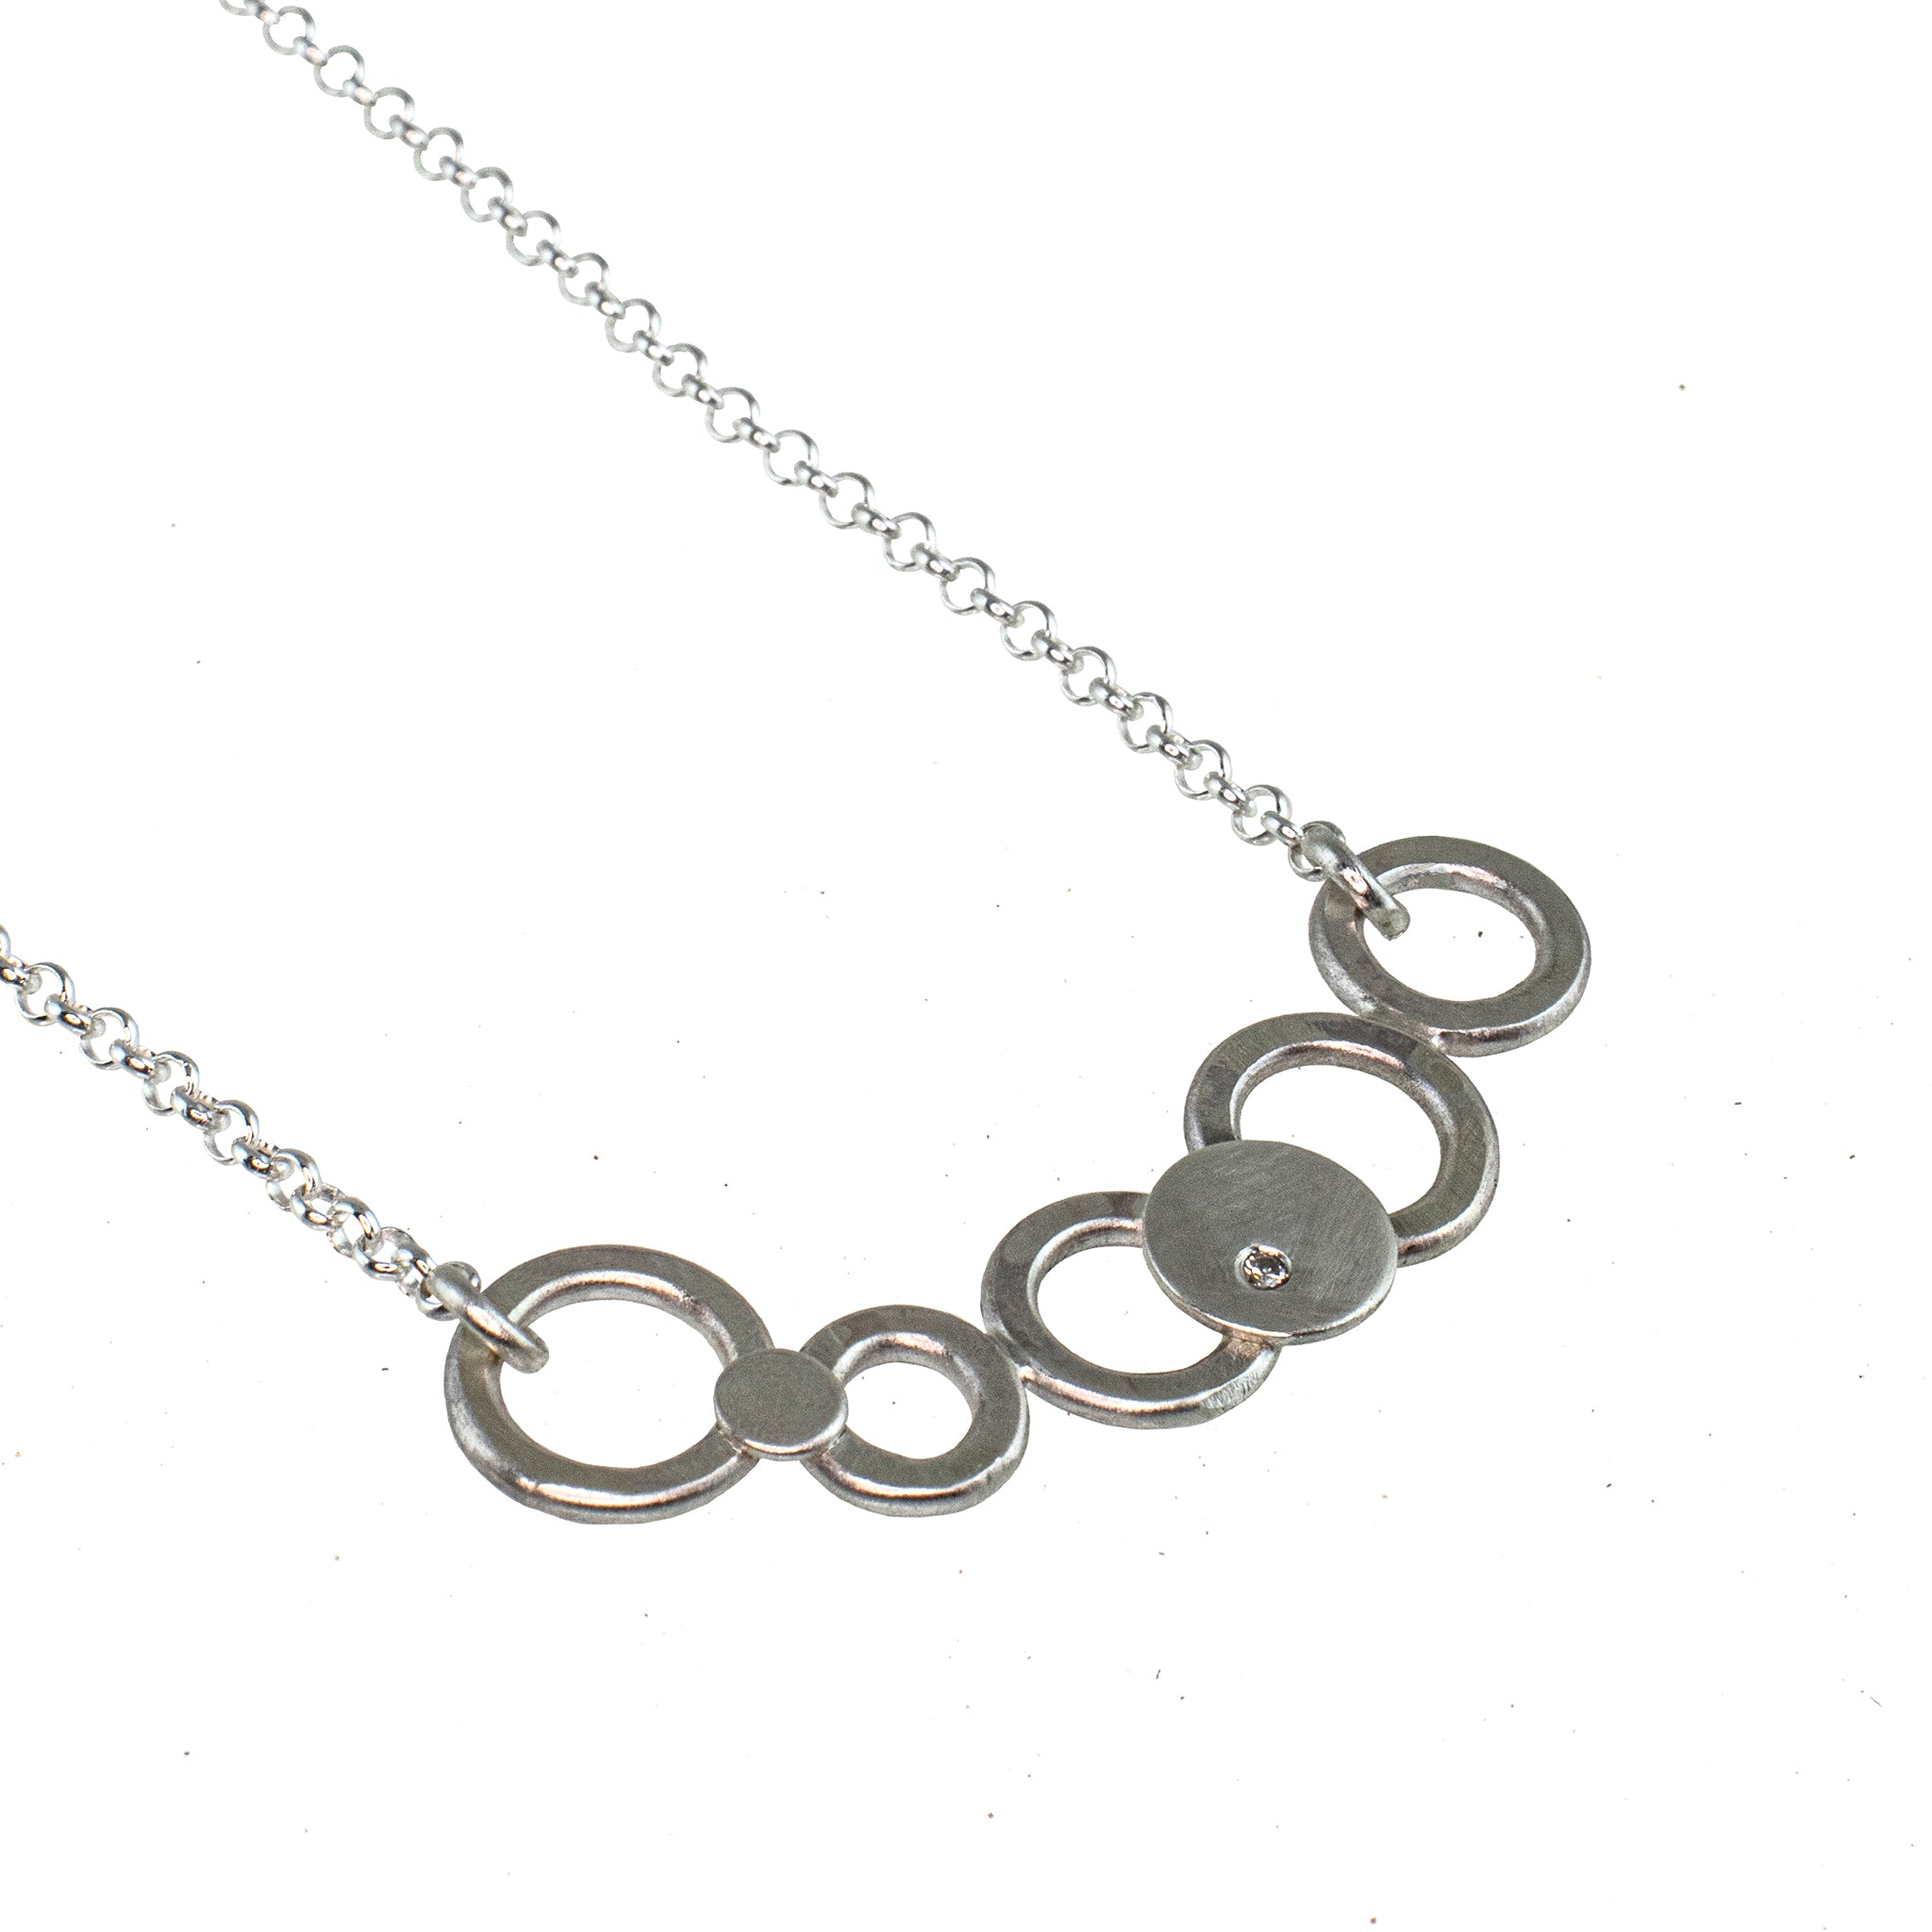 Sterling silver multi circle necklace with diamond by eko jewelry design, Thea